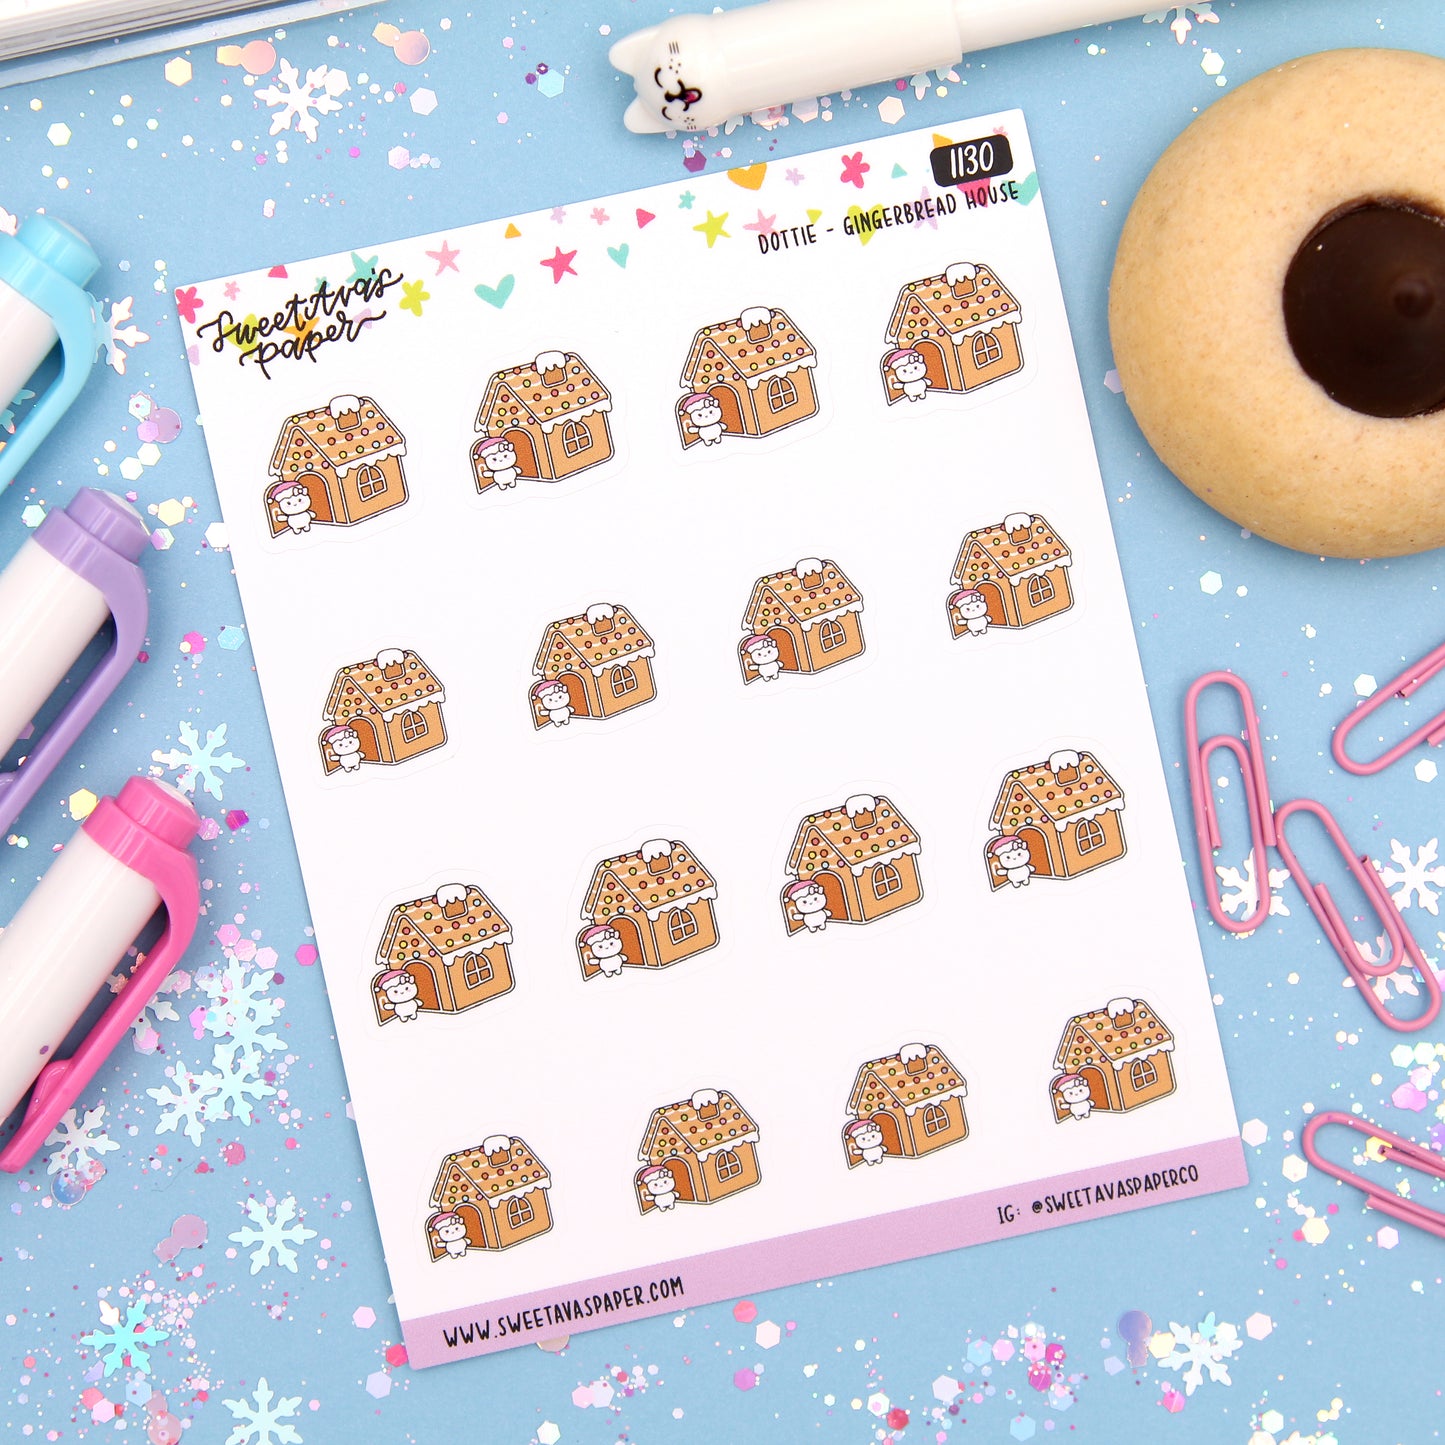 Gingerbread House Planner Stickers - Dottie The Sugar Bug - [1130]